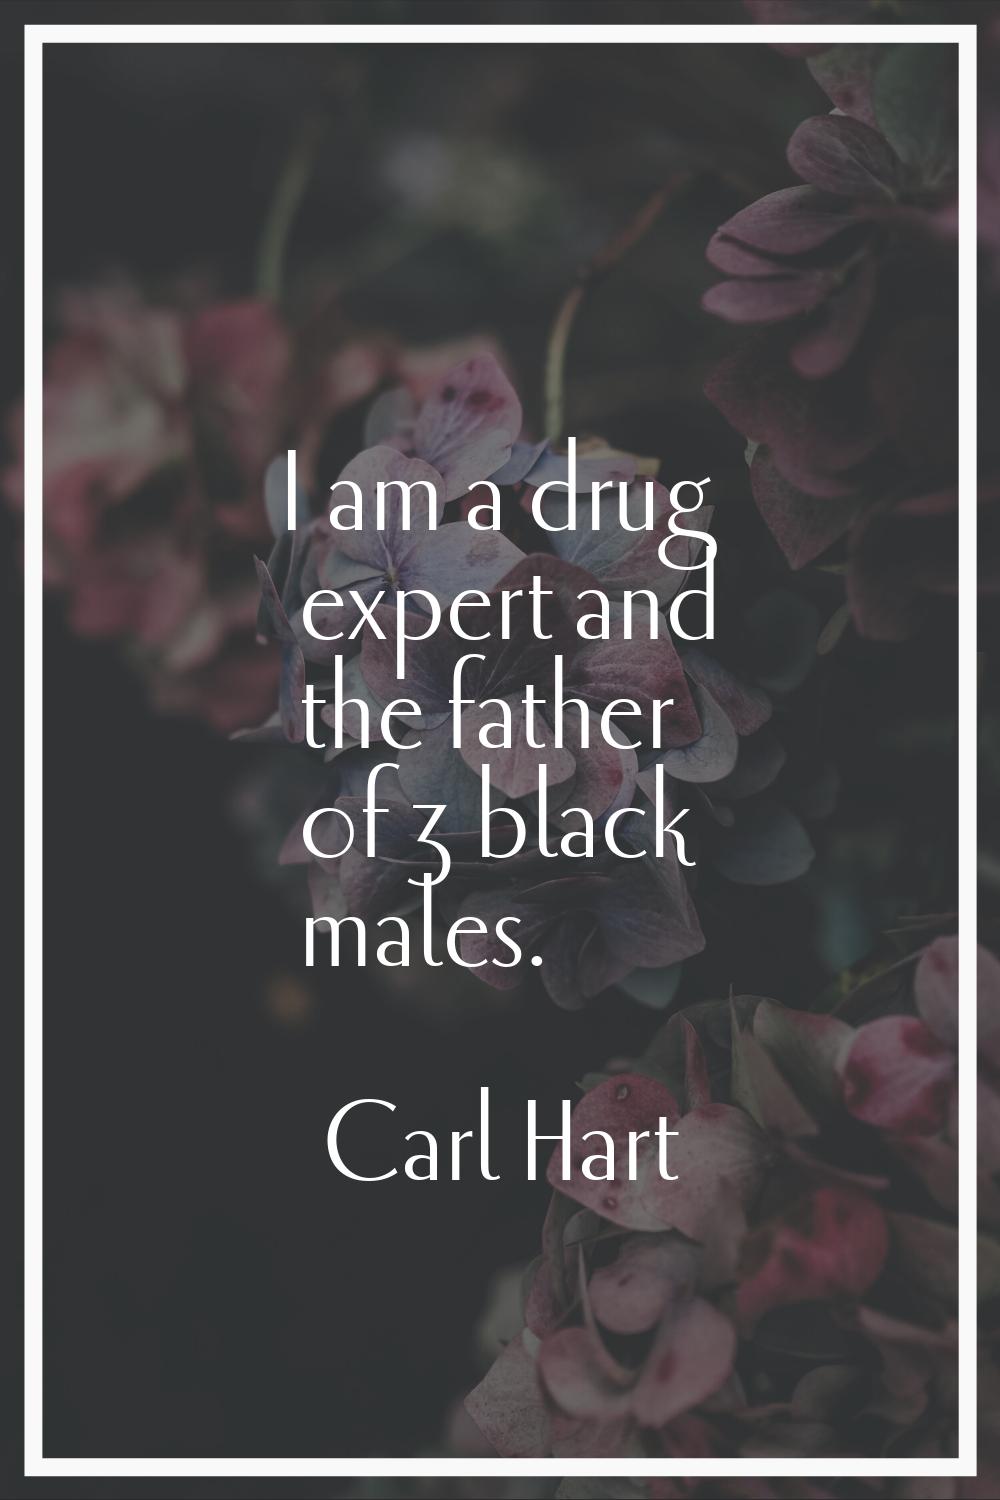 I am a drug expert and the father of 3 black males.